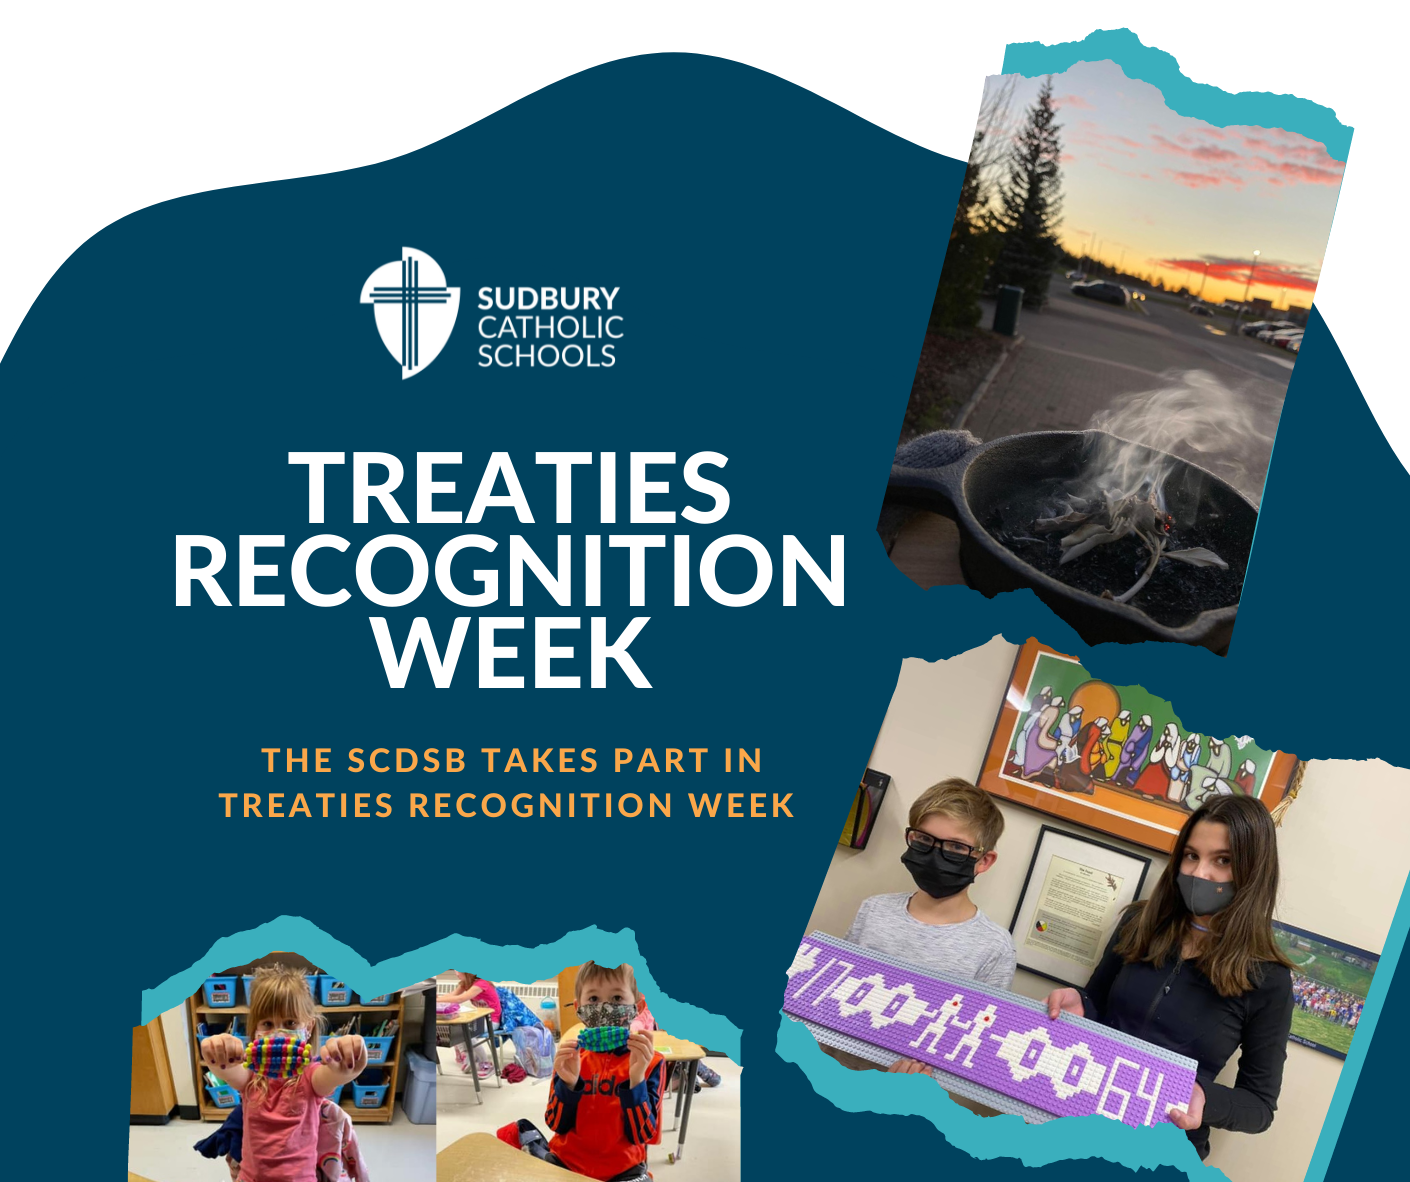 The SCDSB Takes Part in Treaties Recognition Week